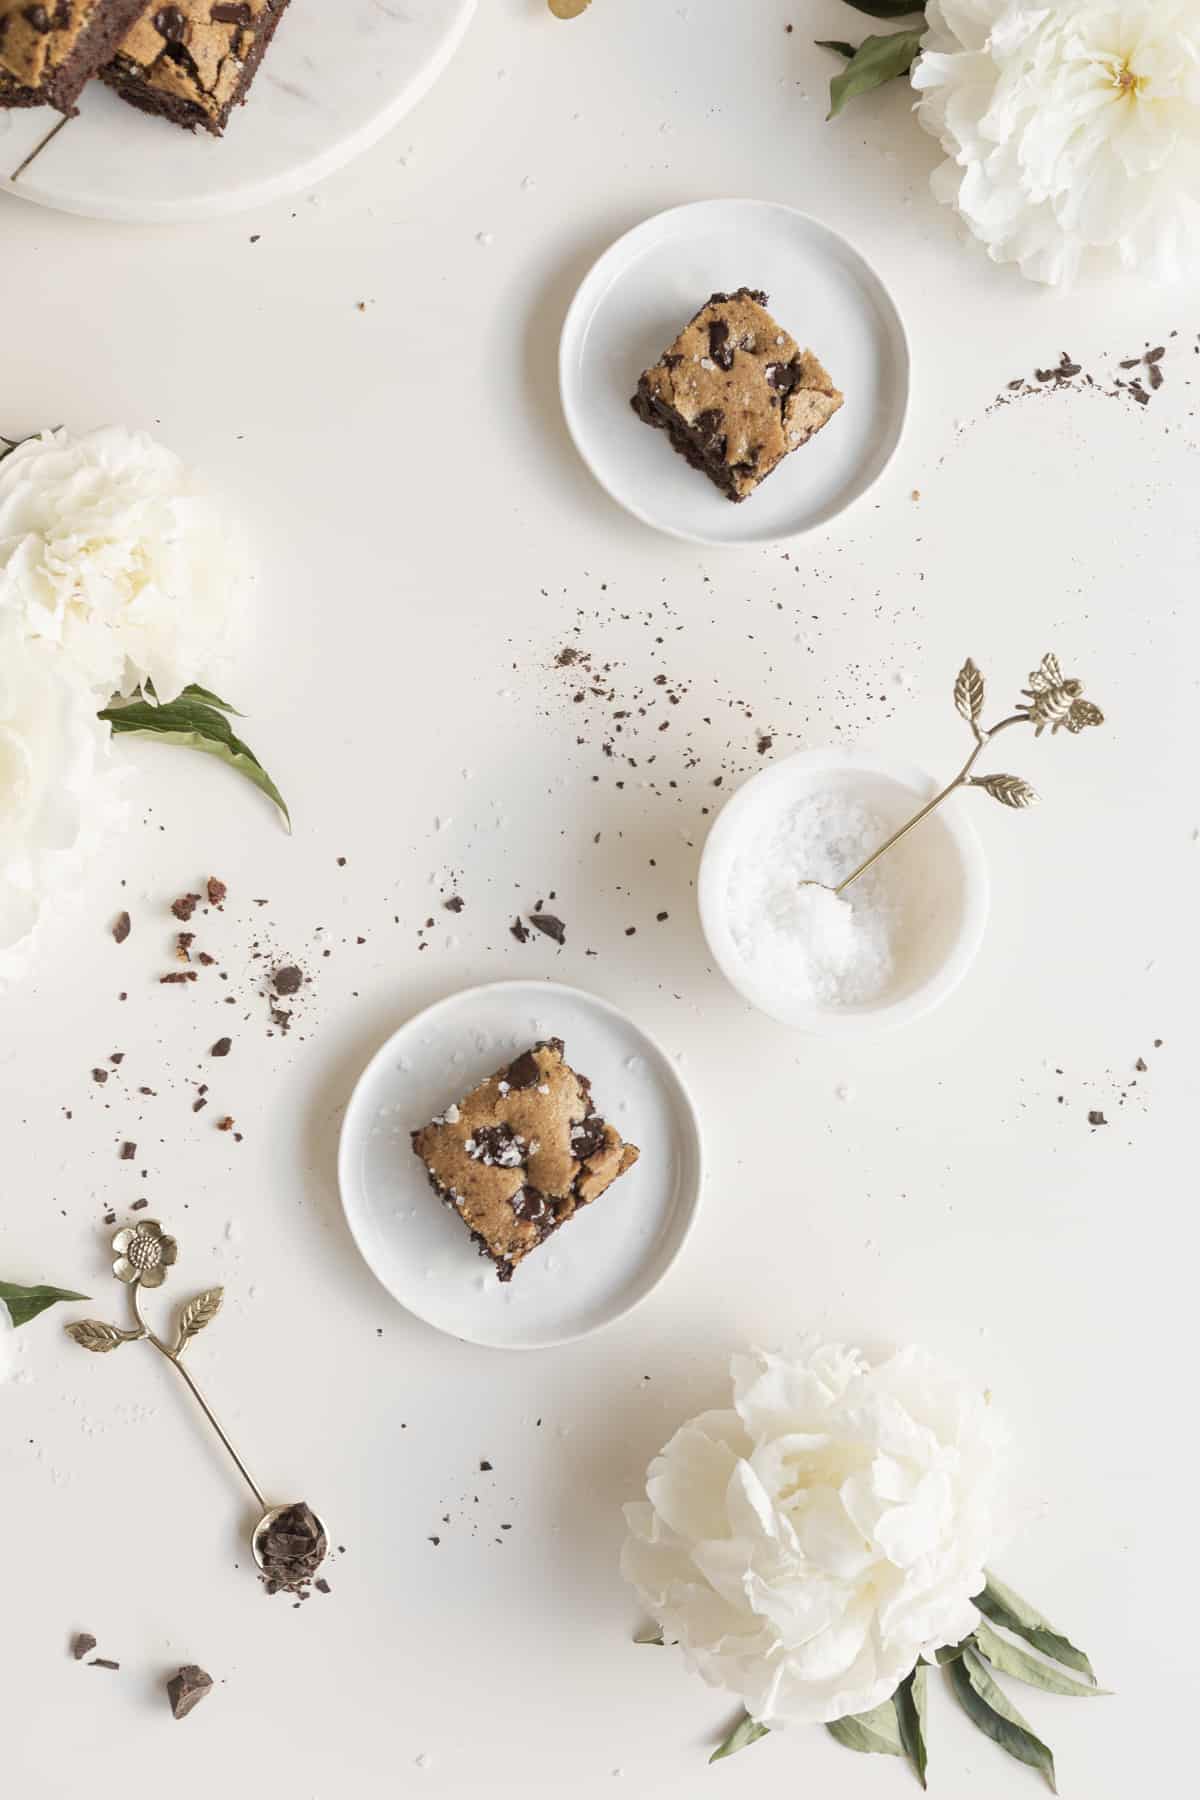 brookies on plates with chocolate in a white bowl and white peonies on a white surface